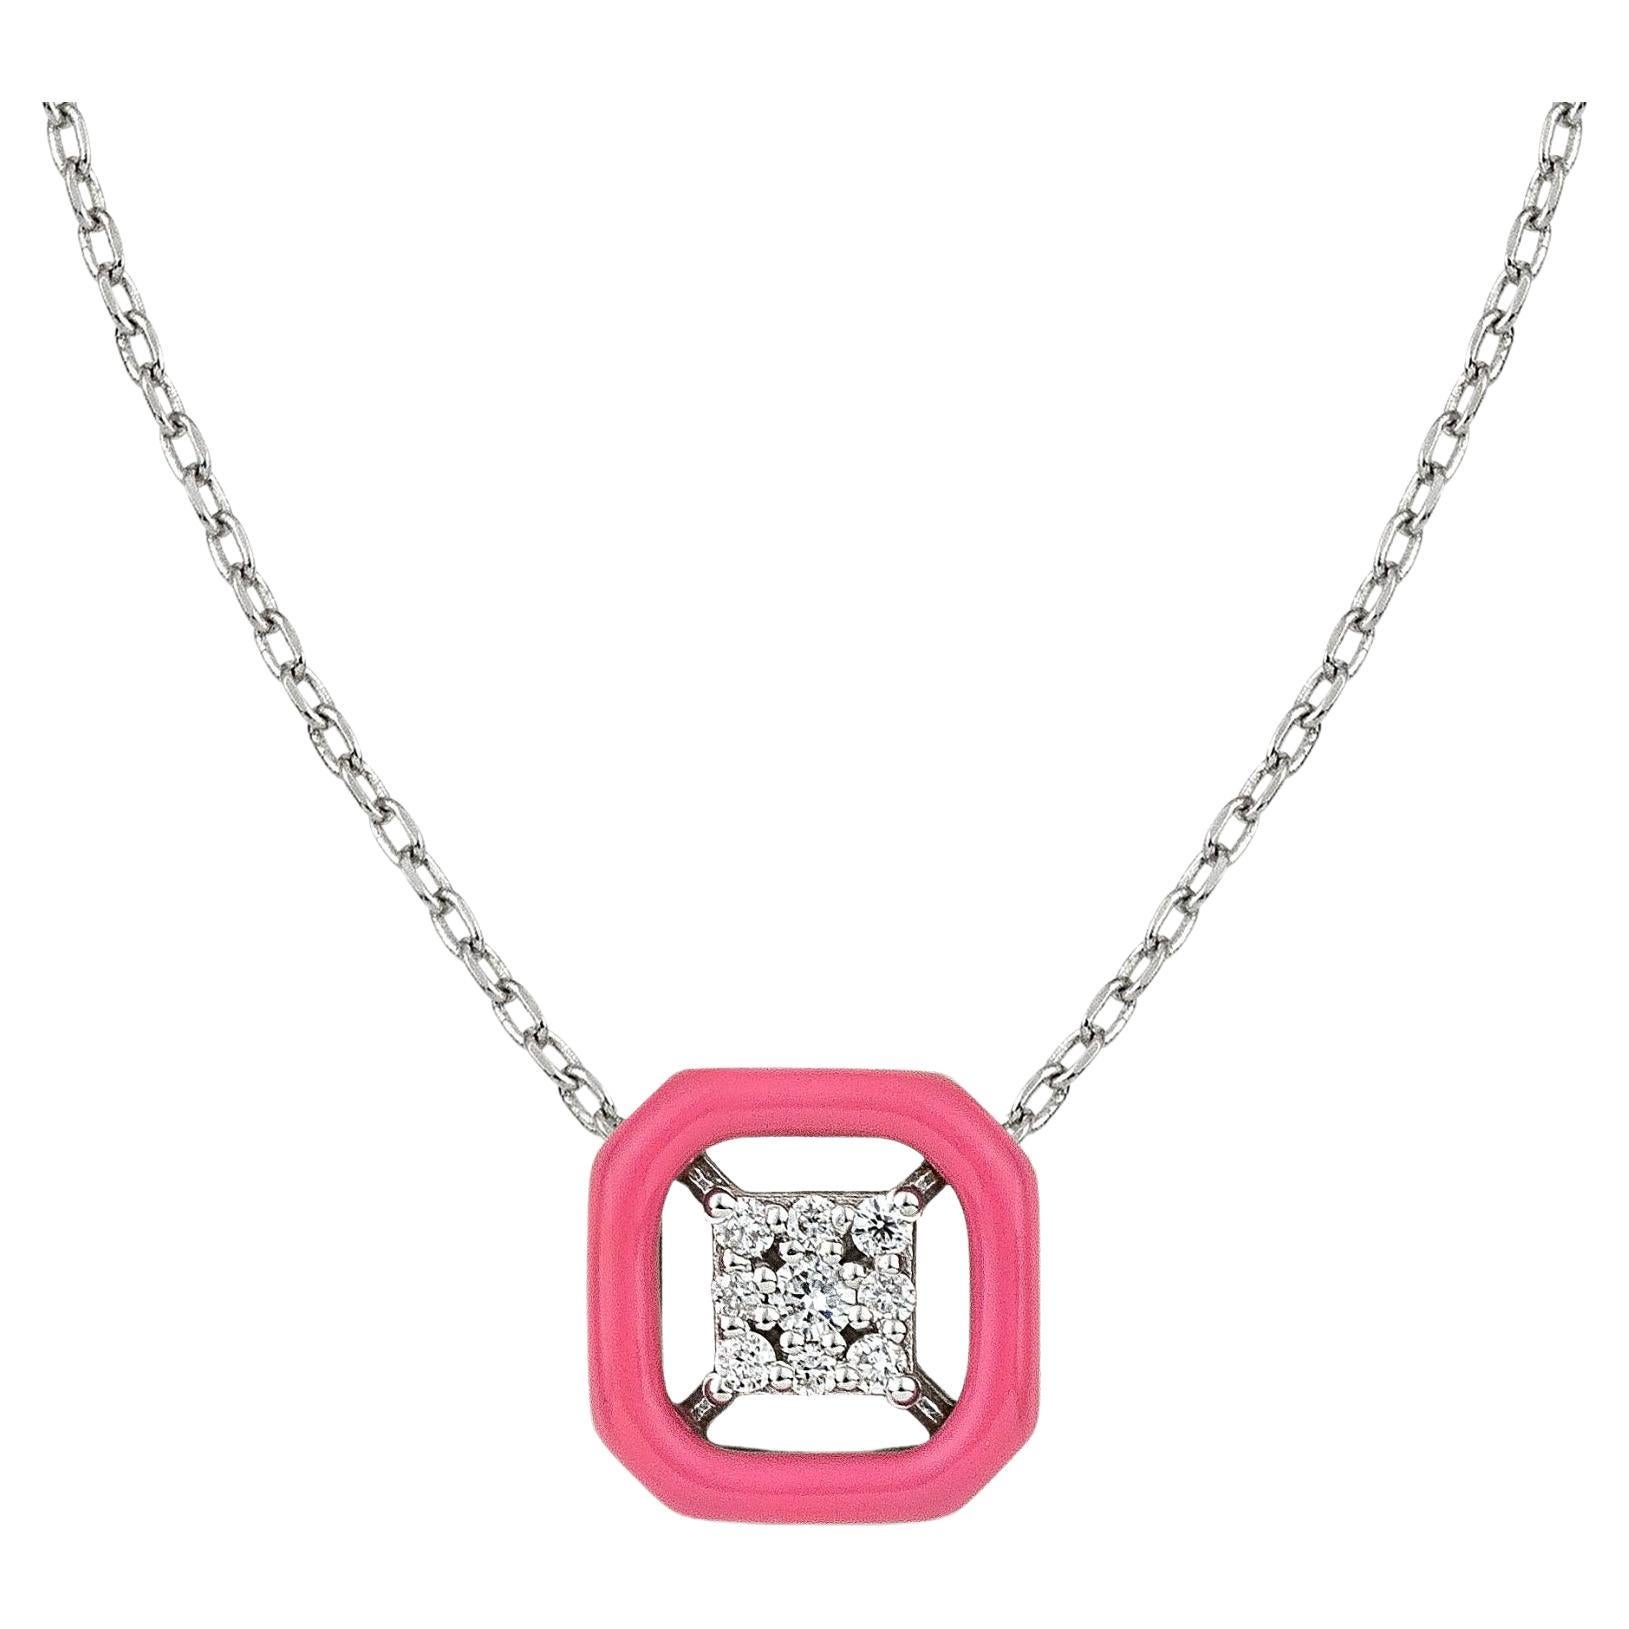 Deco Gold Necklace with Diamonds and Pink Enamel